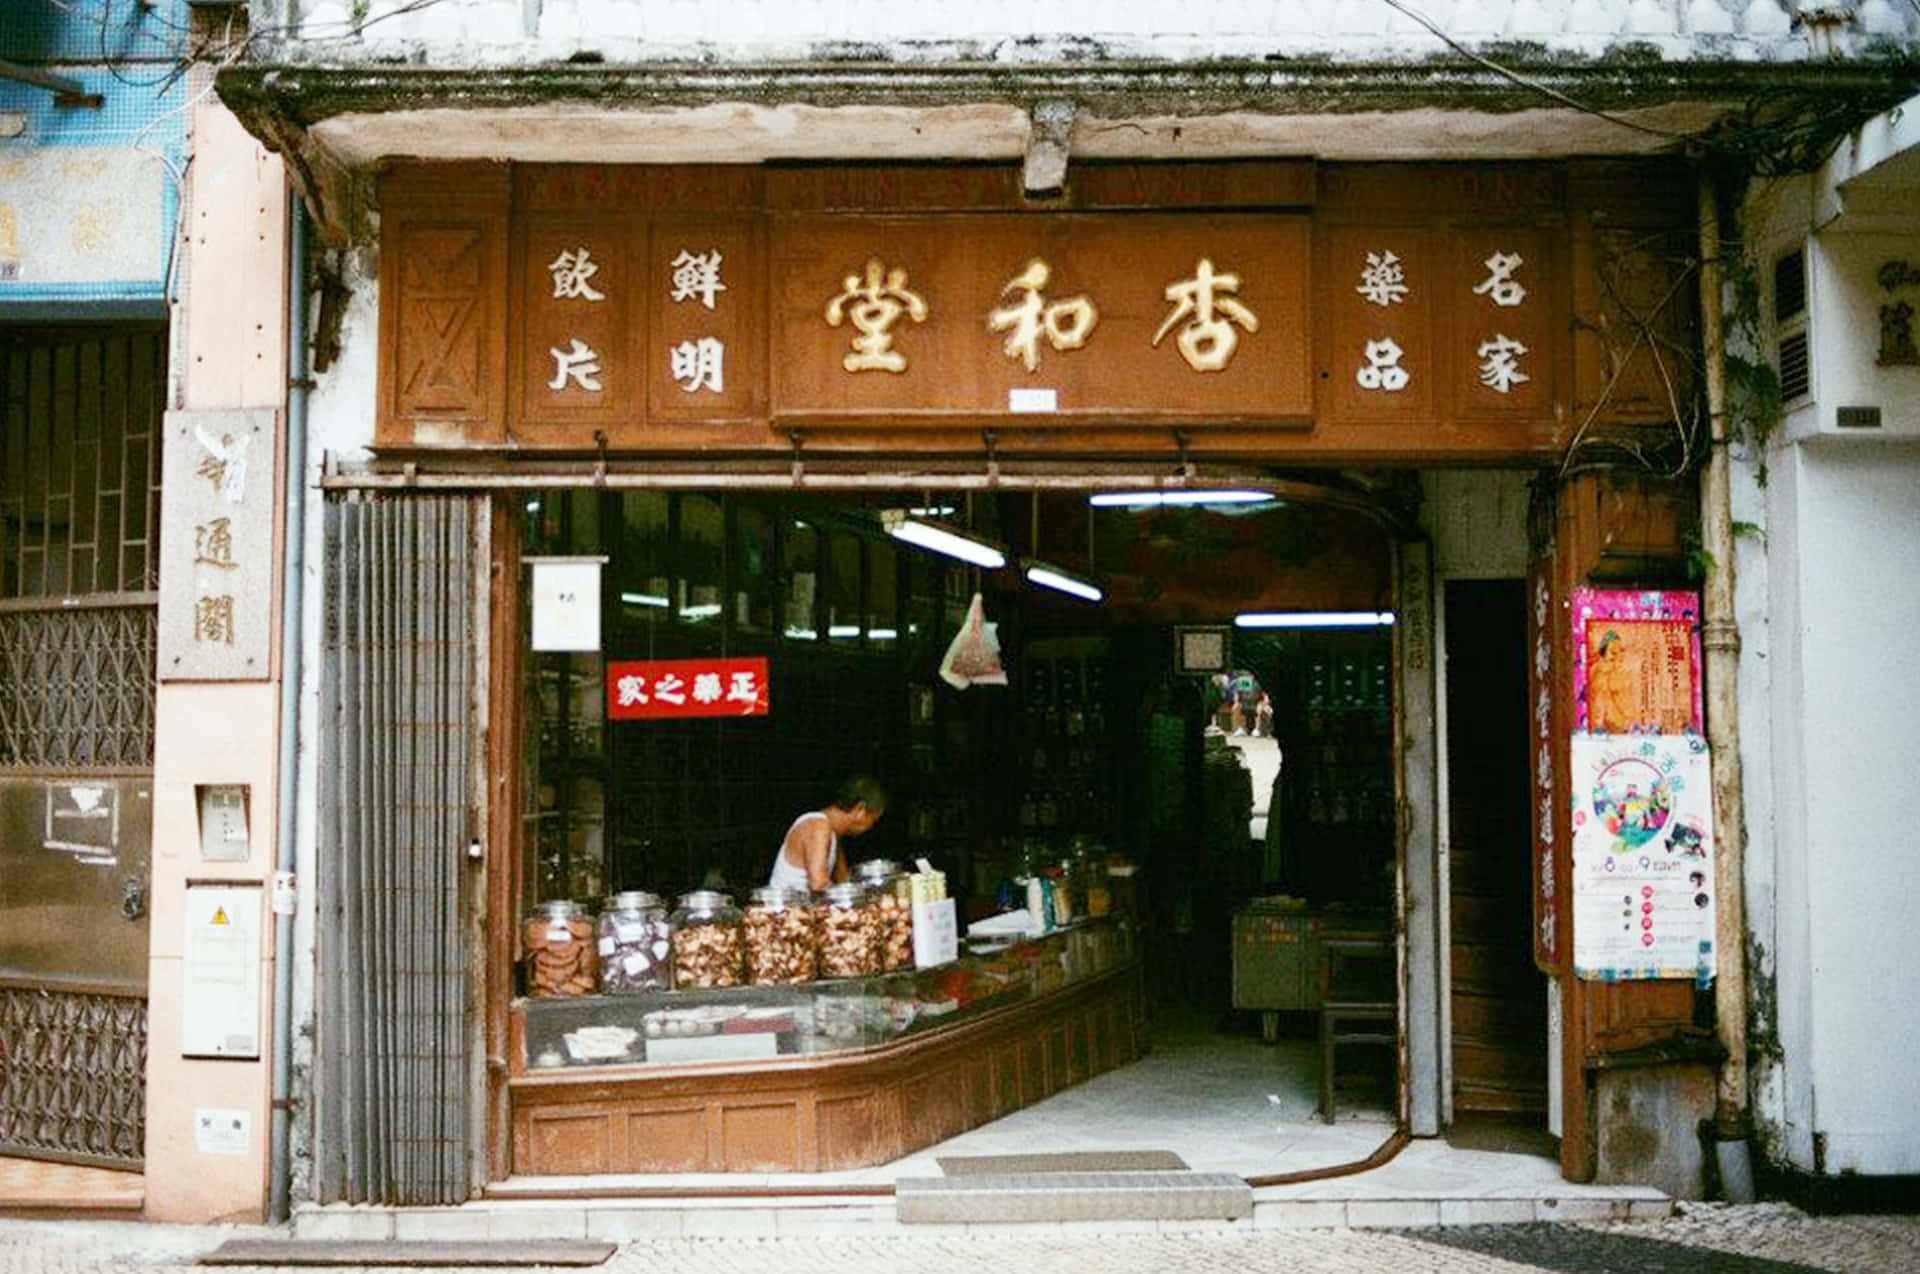 A Shop With Chinese Writing On The Front